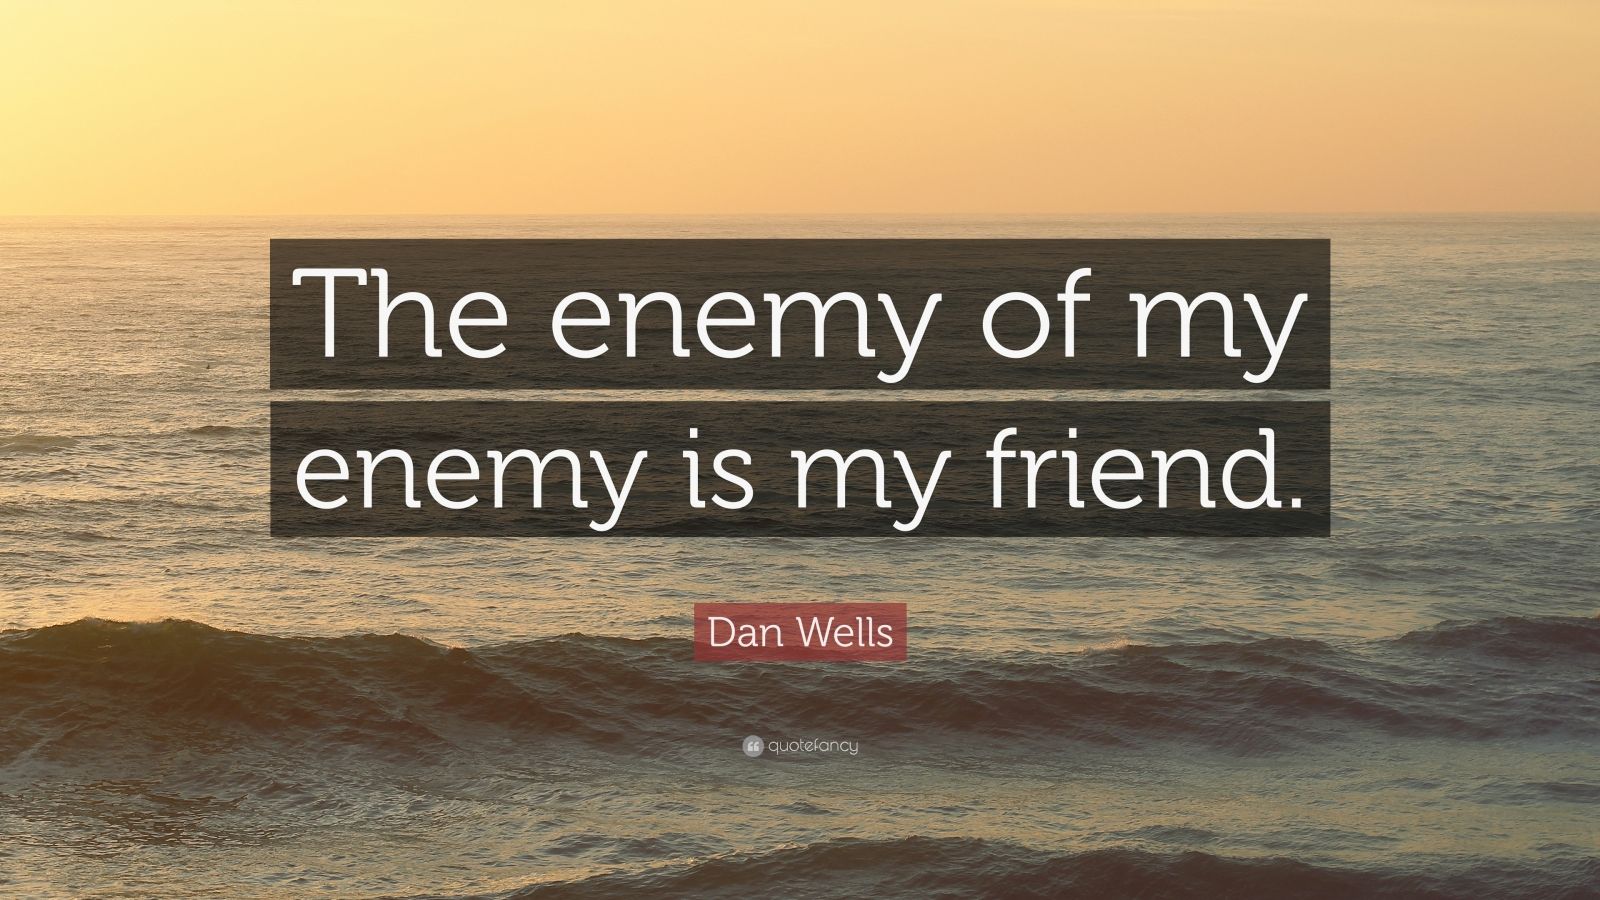 Dan Wells Quote: “The enemy of my enemy is my friend.” (7 wallpapers